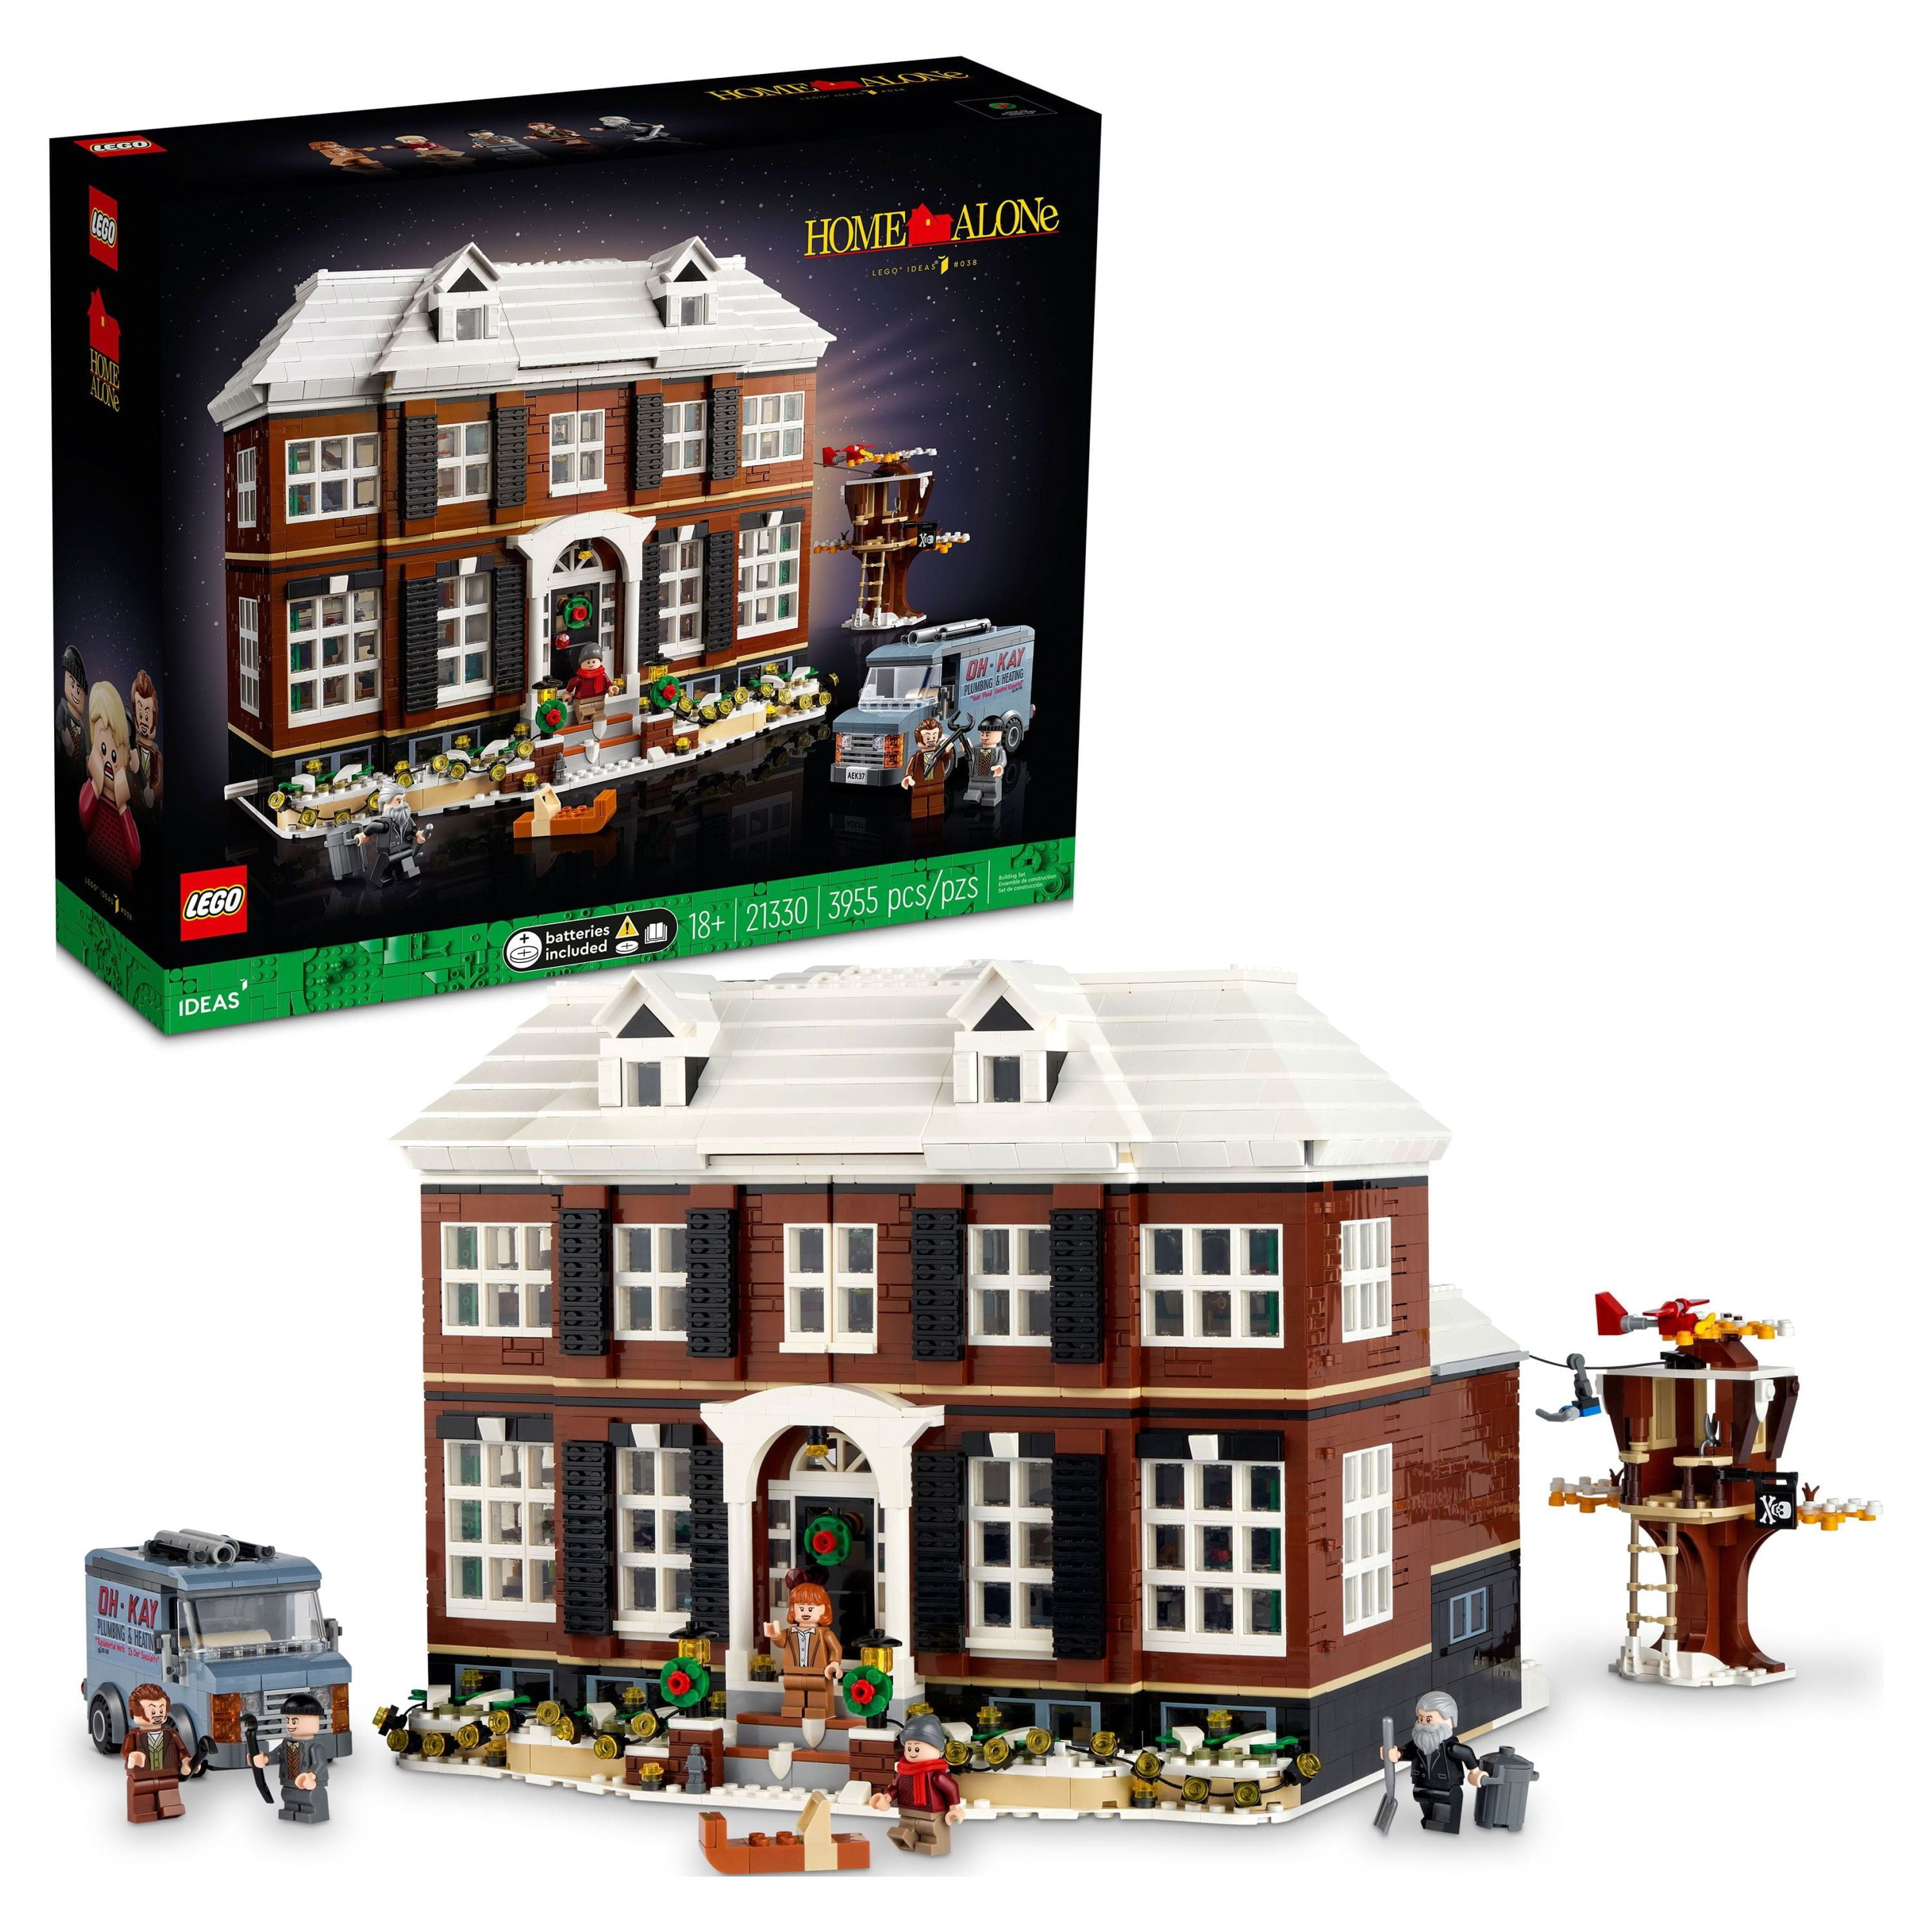 8 Best Escapist Lego Sets for Adults 2021